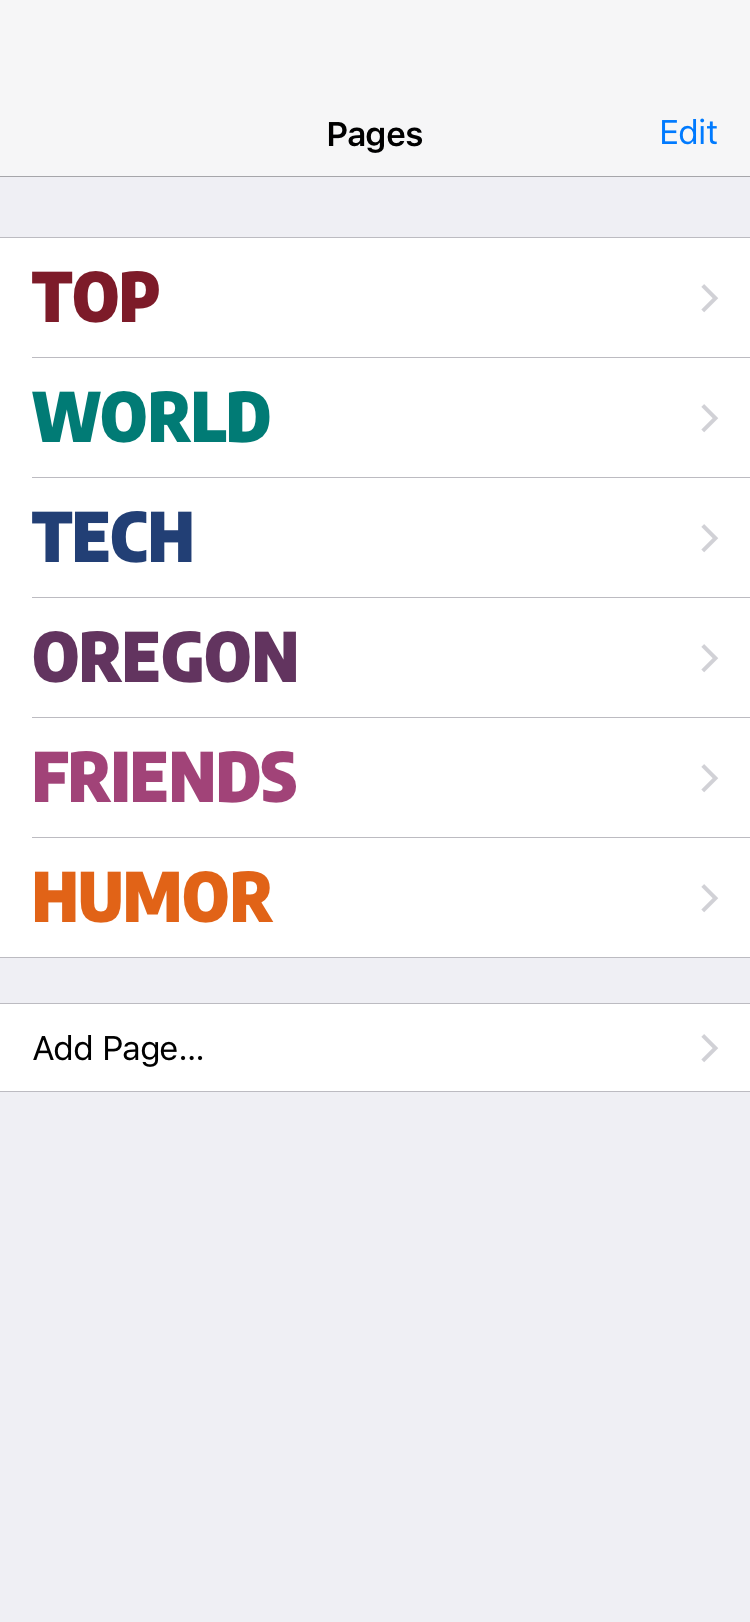 Screenshot: List of pages in news app